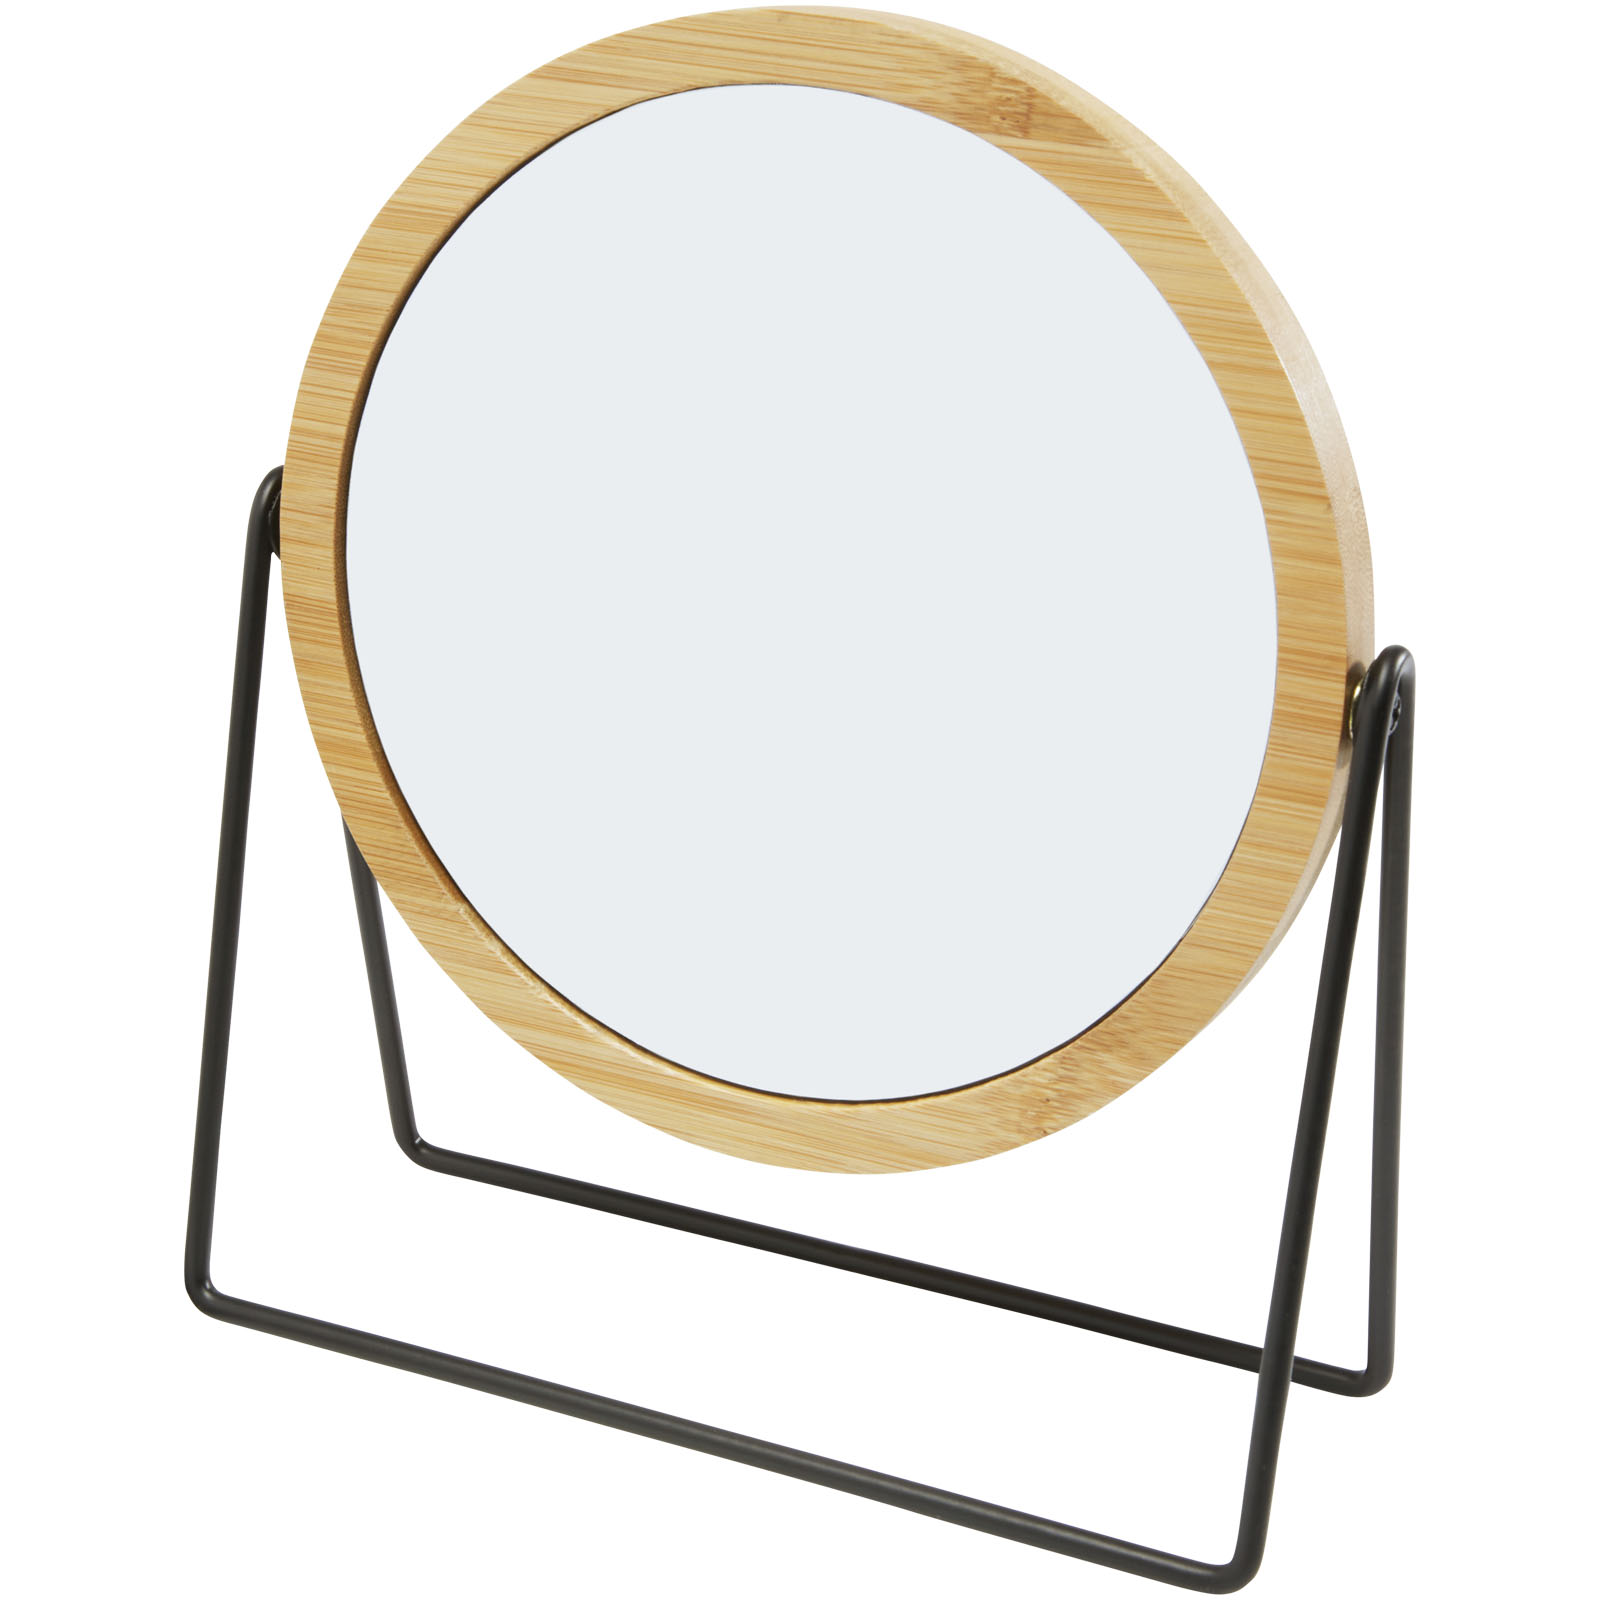 Advertising Personal Care - Hyrra bamboo standing mirror